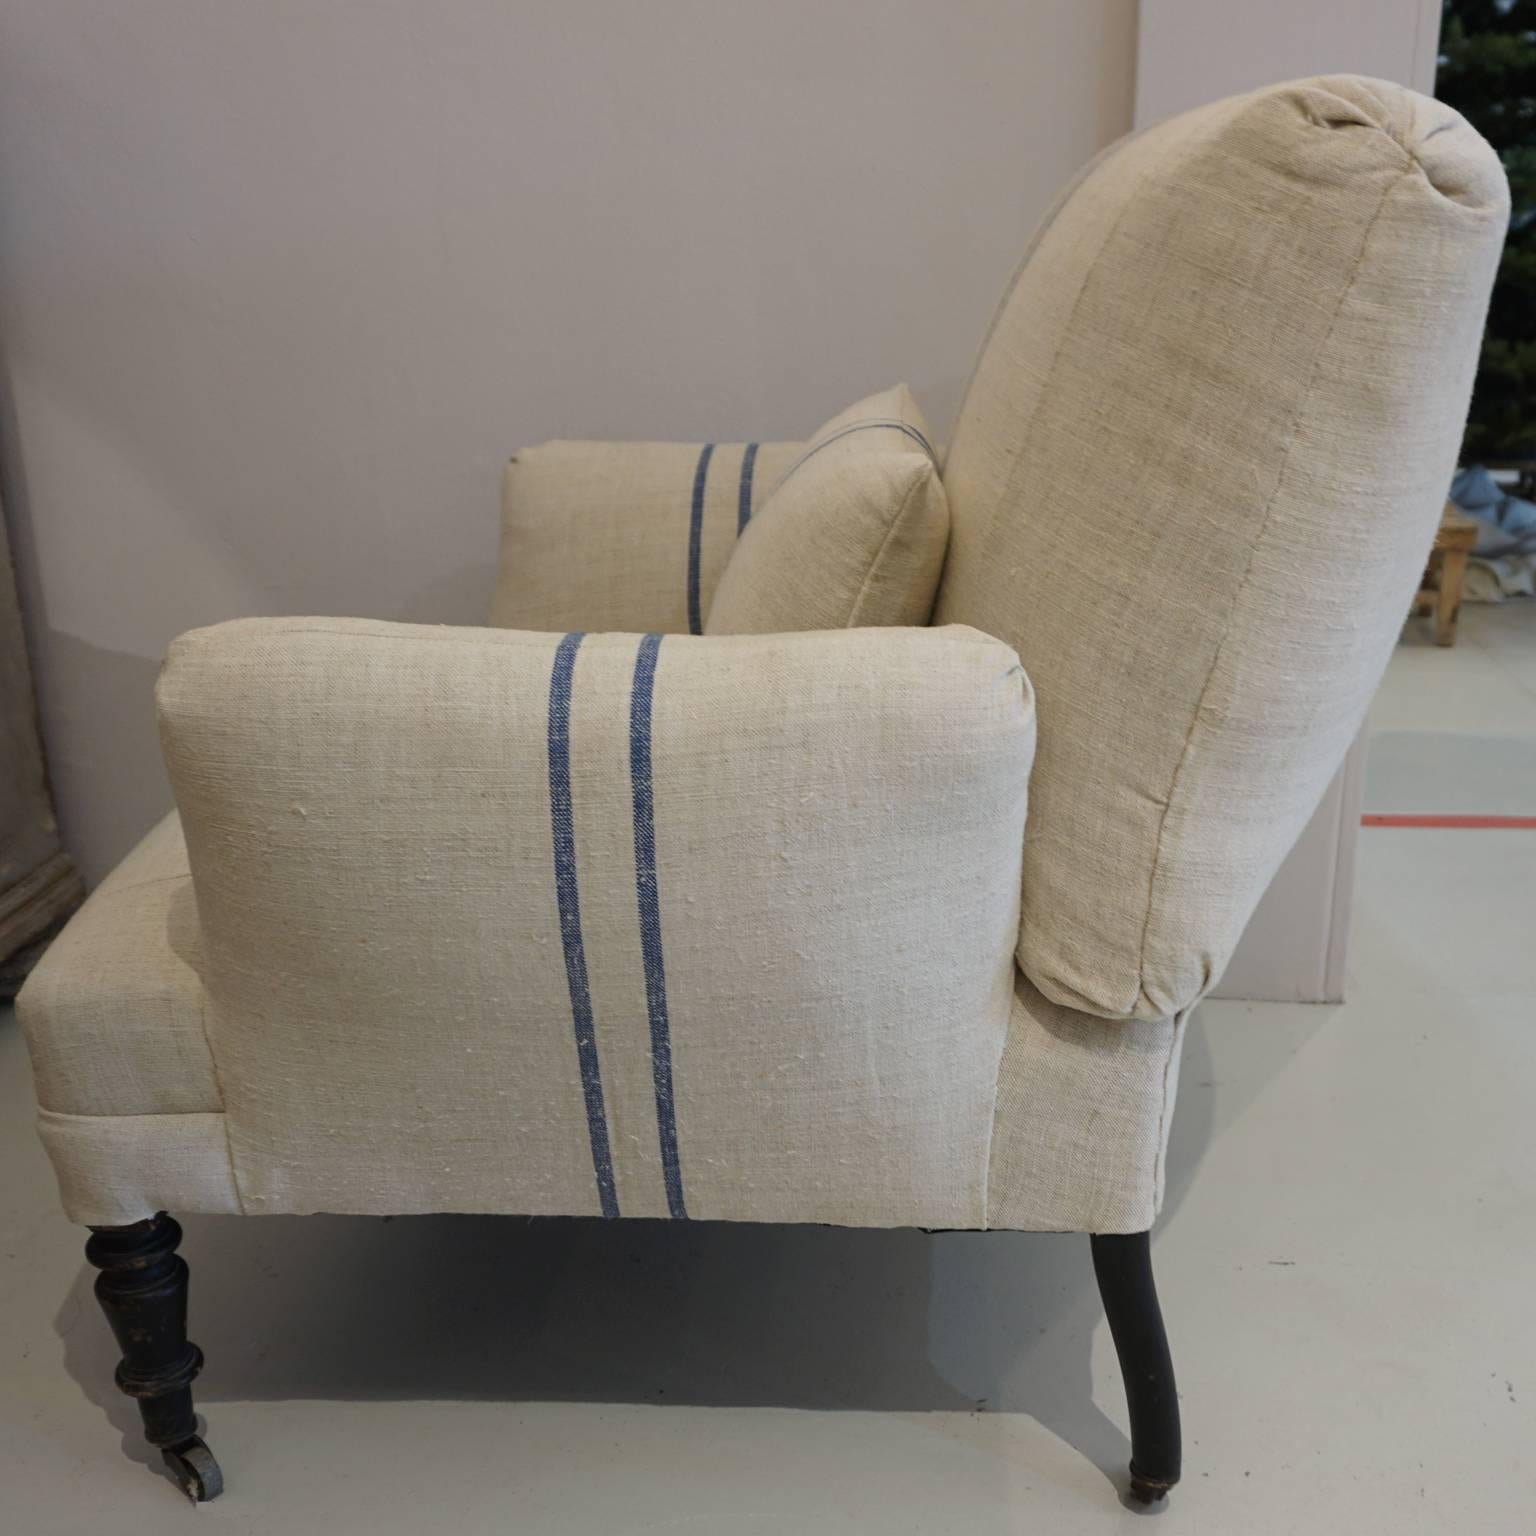 Napoleon III Fauteuil on rollers. Newly re upholstered in antique neutral French burlap back linen with dark blue centered double stripes, thick upholstered armrests. Includes small backrest pillow for additional support, circa 1860, France. The